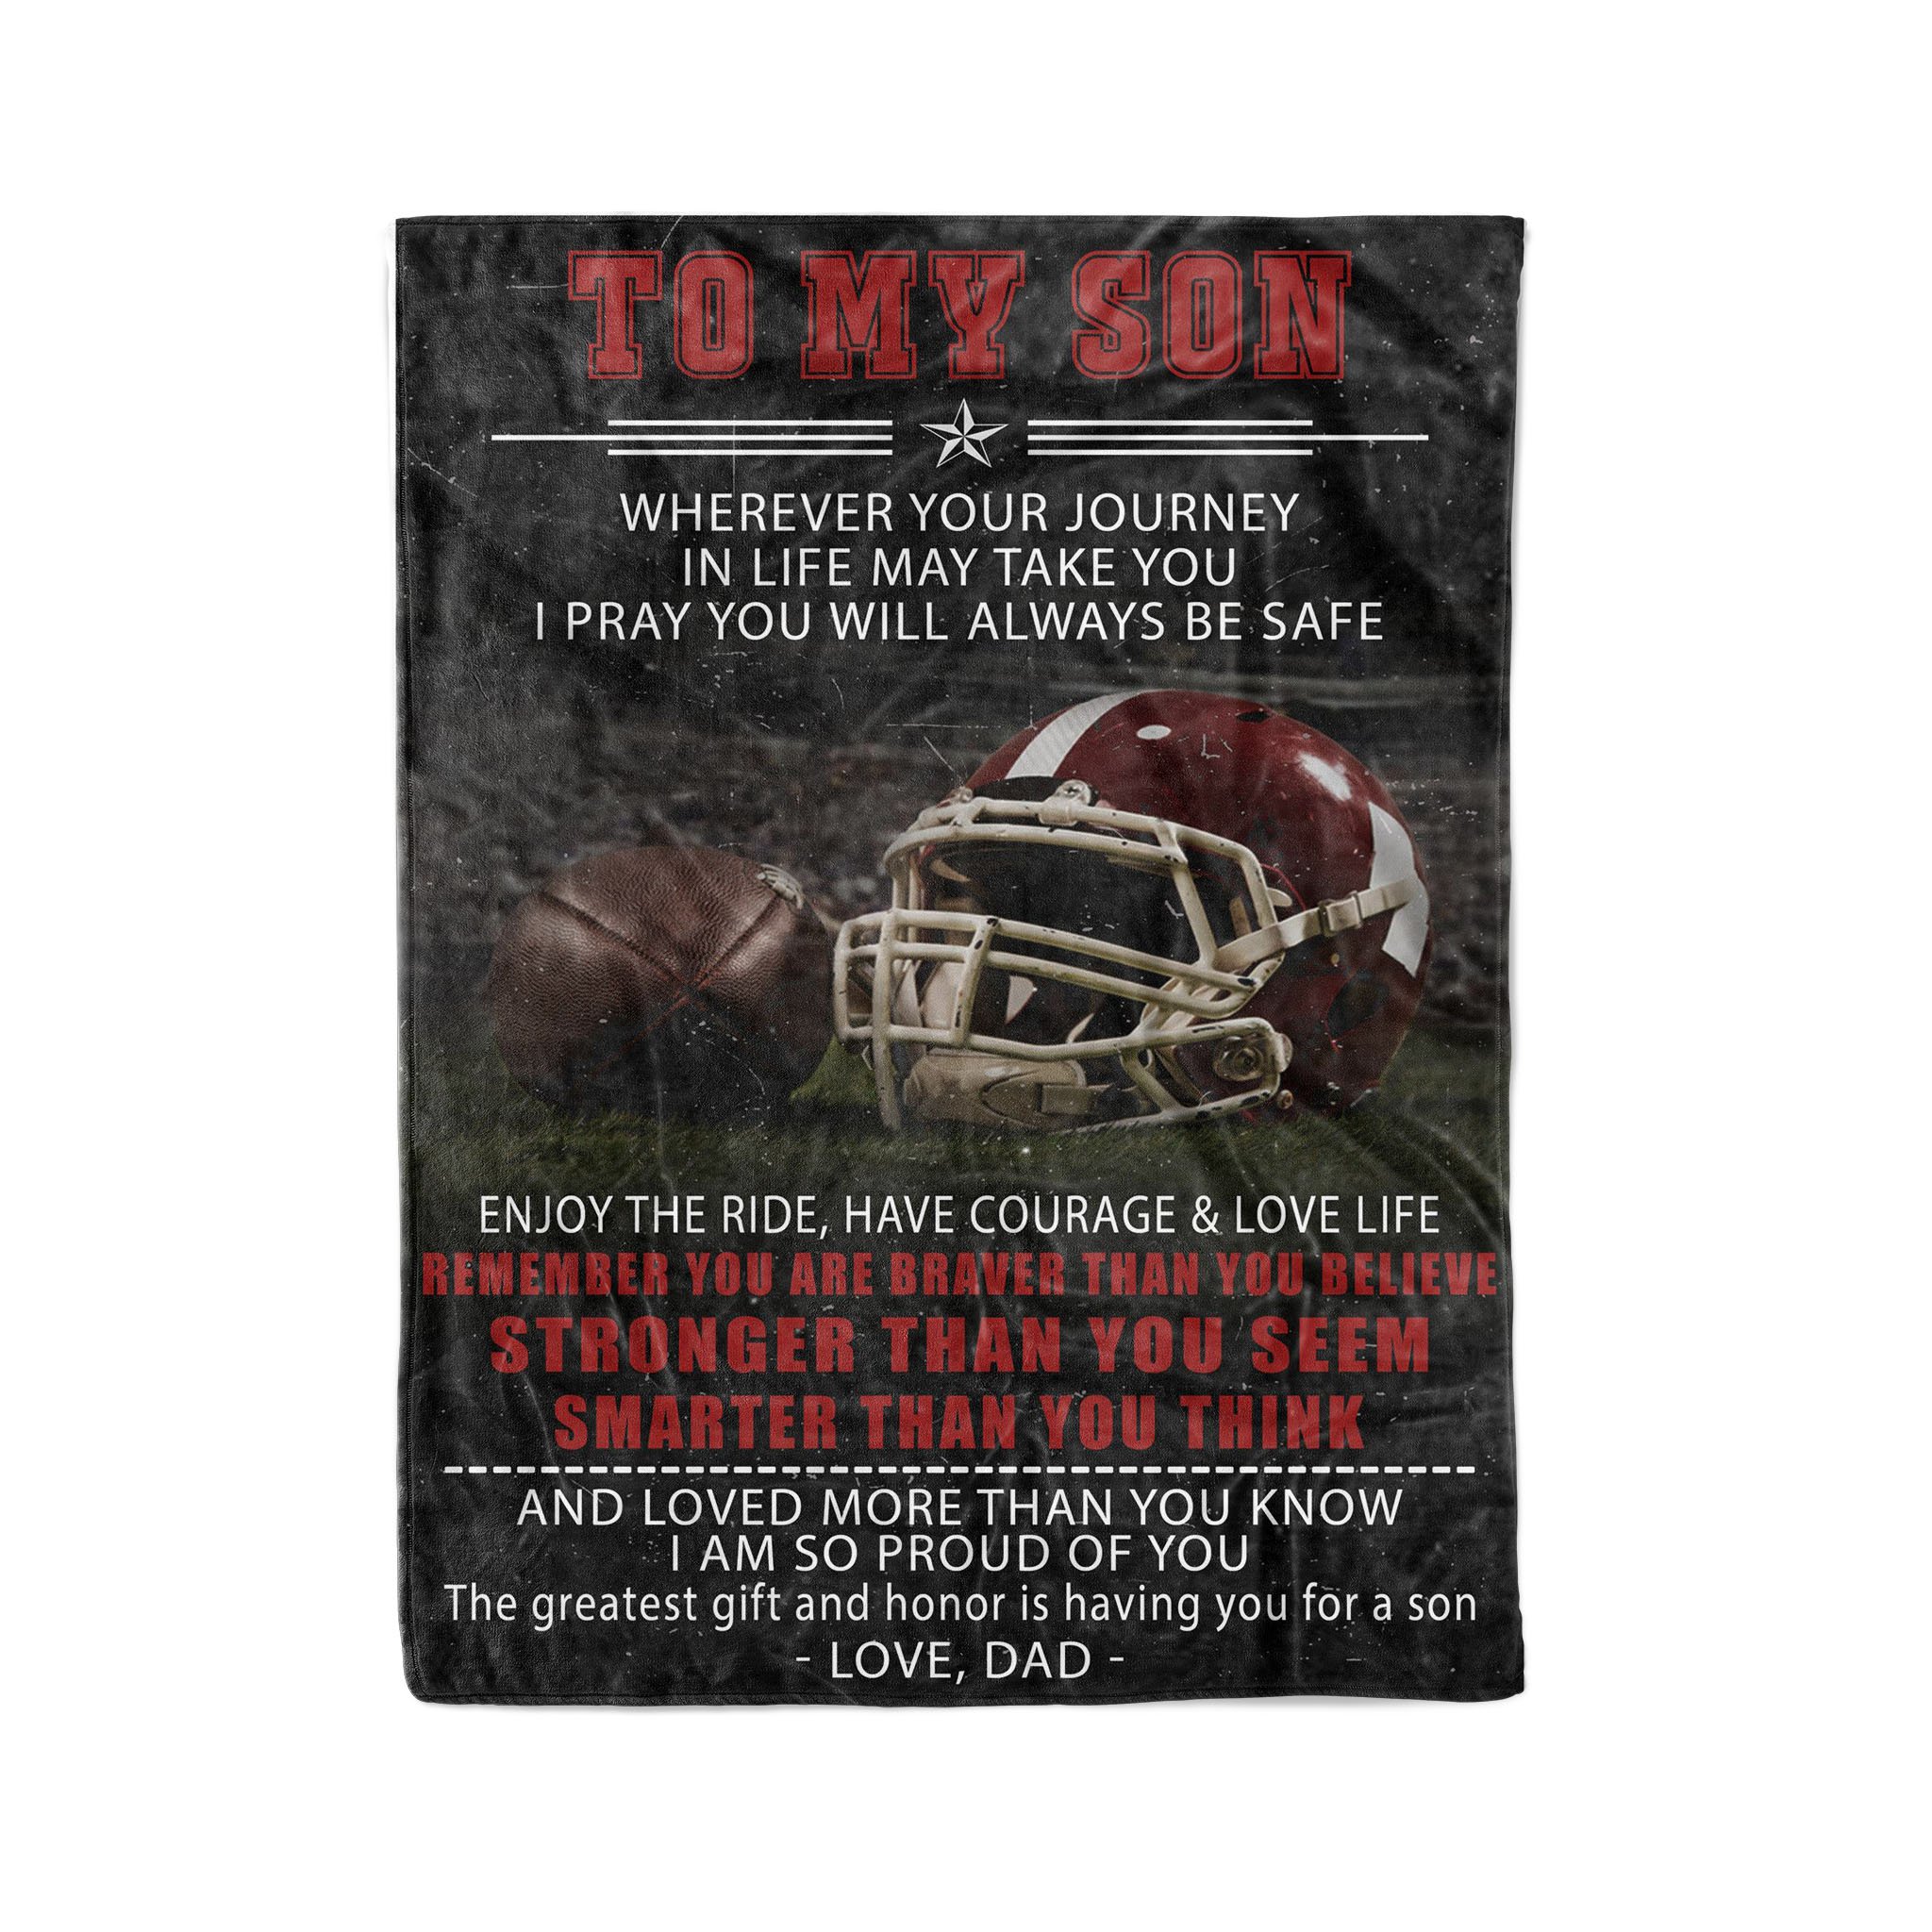 Fleece American football Blanket dad to son Wherever your journey in life may take you